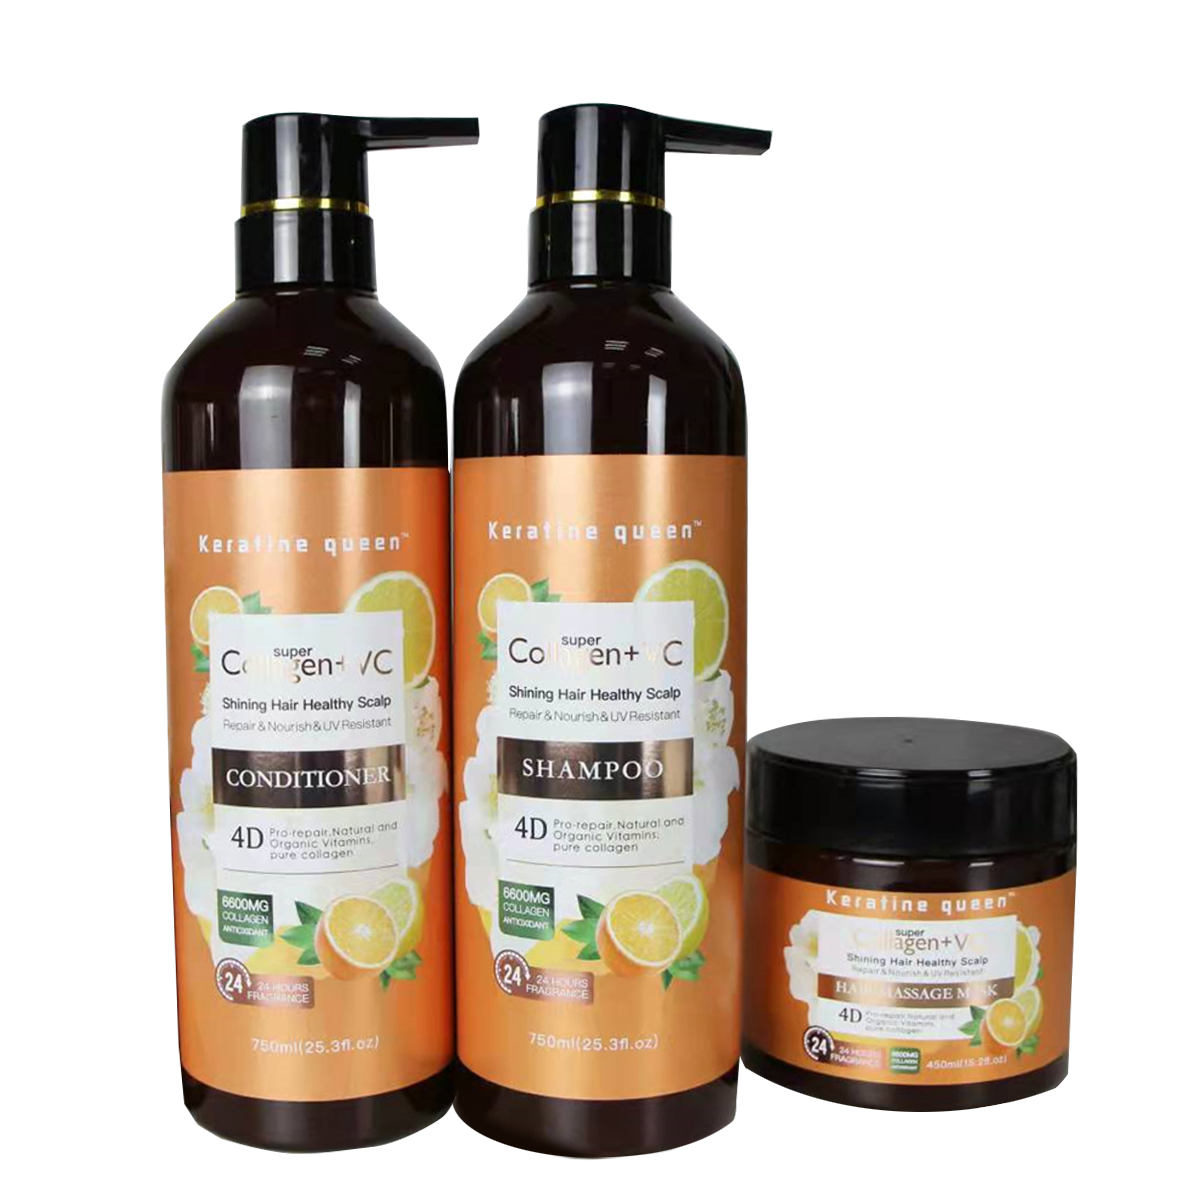 KERATIN QUEEN Super Collagen+VC Shampoo, Conditioner and Hair Mask Combo Set